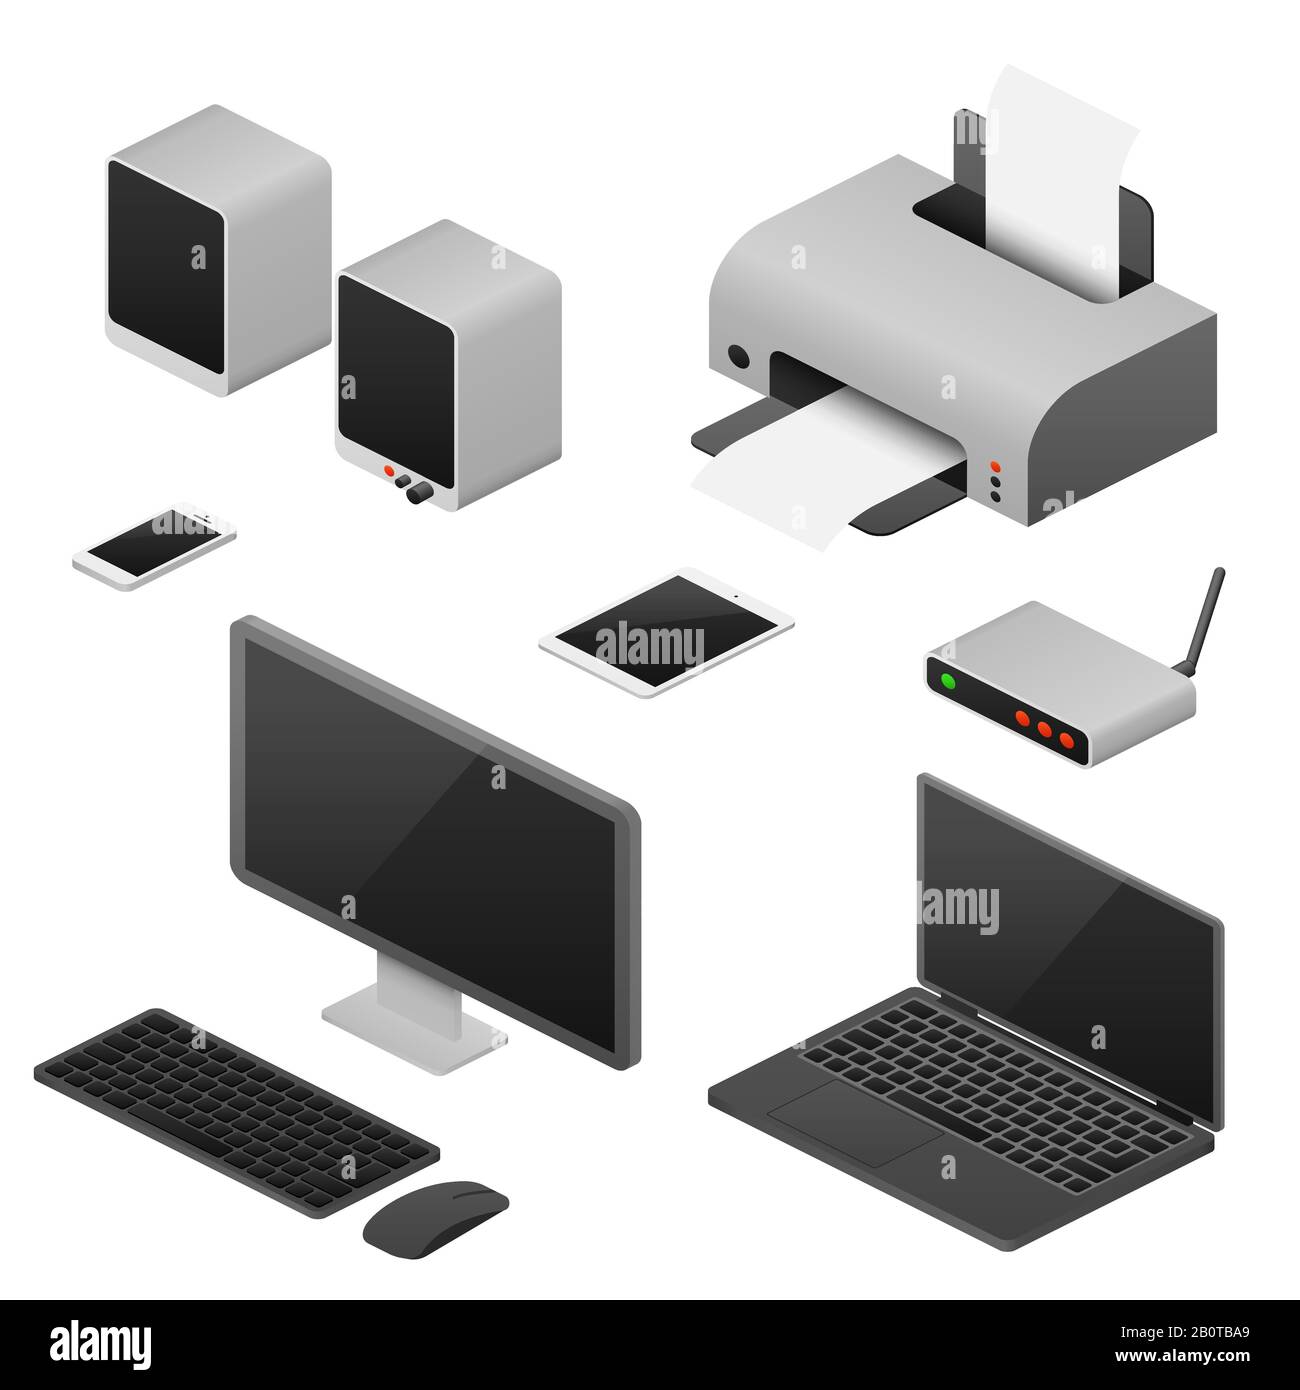 https://c8.alamy.com/comp/2B0TBA9/digital-workstation-isometric-vector-computers-supplies-of-office-workspace-router-and-tablet-isometric-equipment-for-workplace-office-isometric-illustration-2B0TBA9.jpg